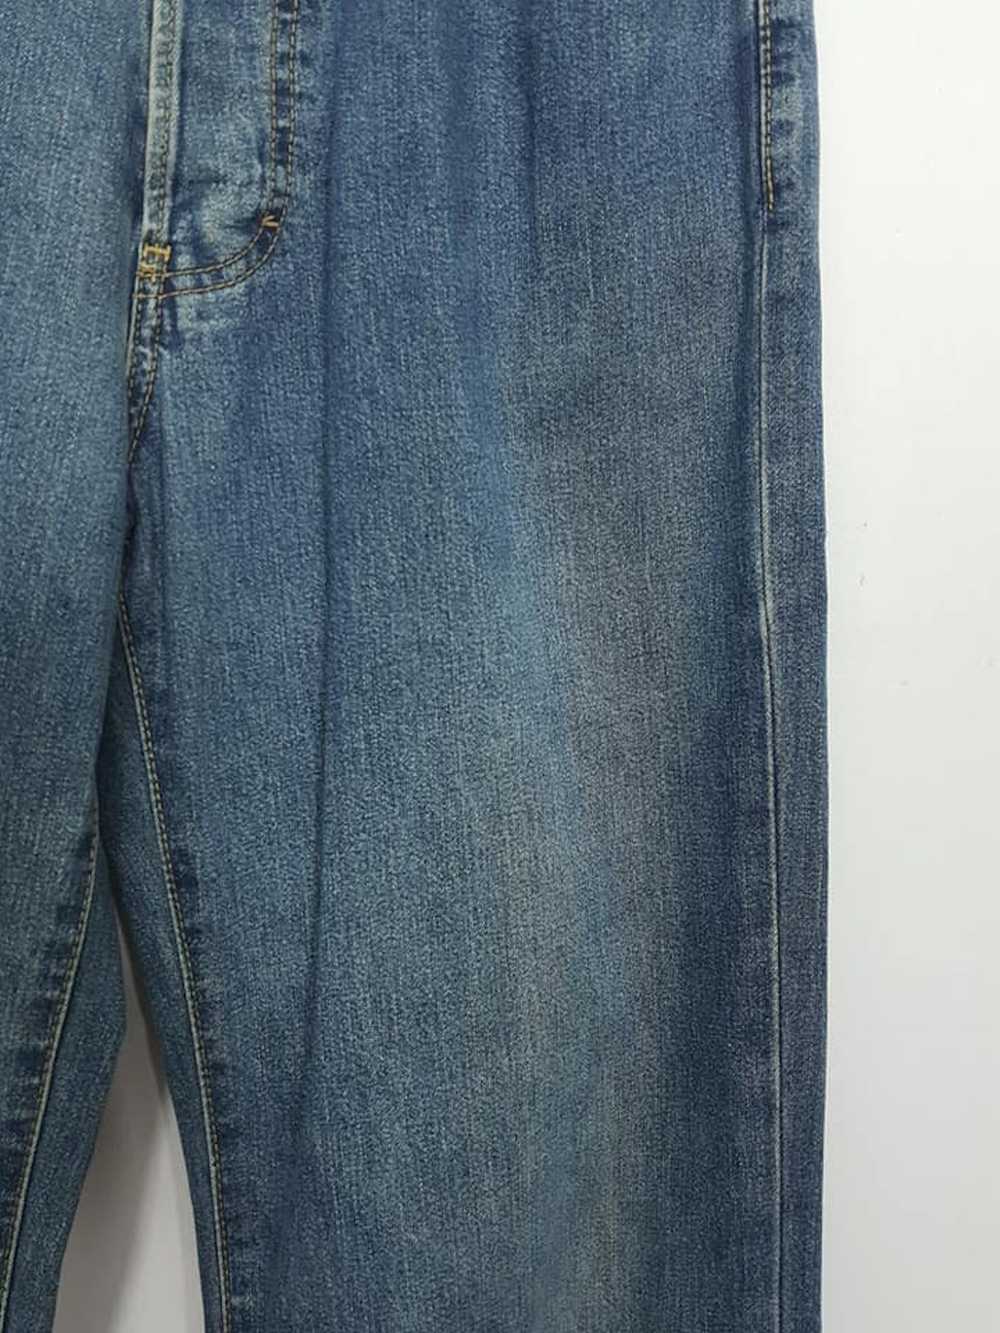 Paul Smith Paul Smith Button Fly Jeans MADE IN JA… - image 10